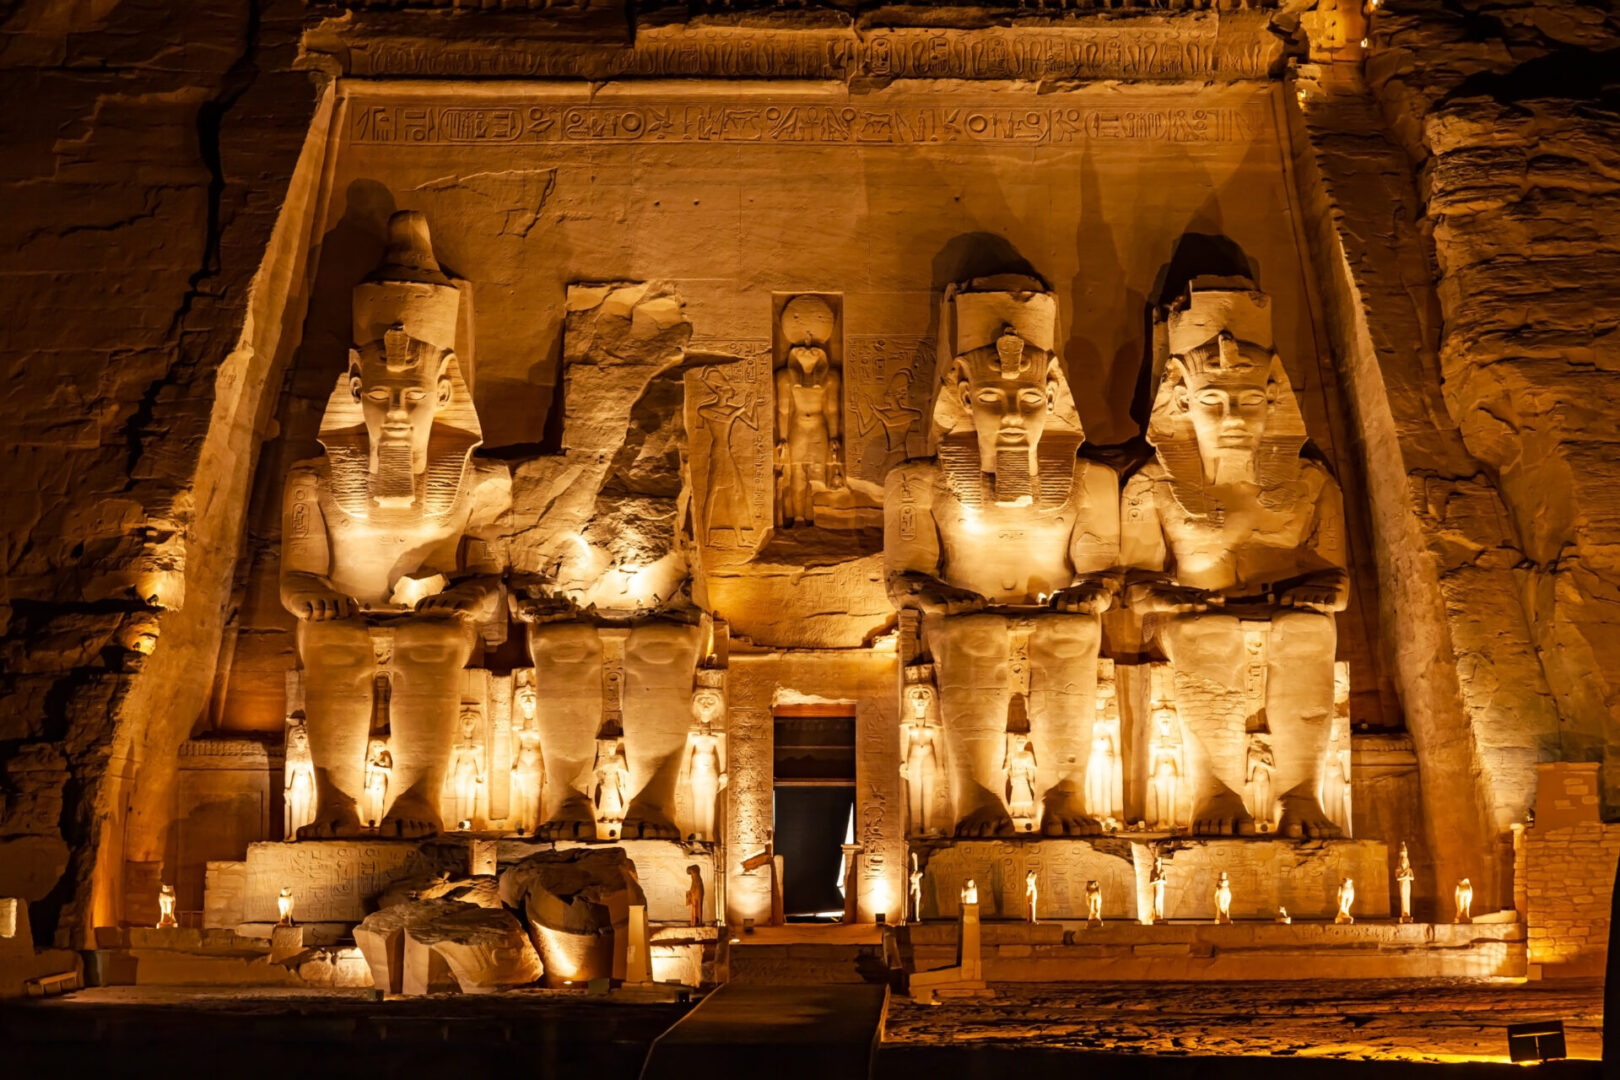 Statue of Pharaoh Ramses II in front of The Great Temple of Ramses II in Abu Simbel in the night, Aswan, Upper Egypt.